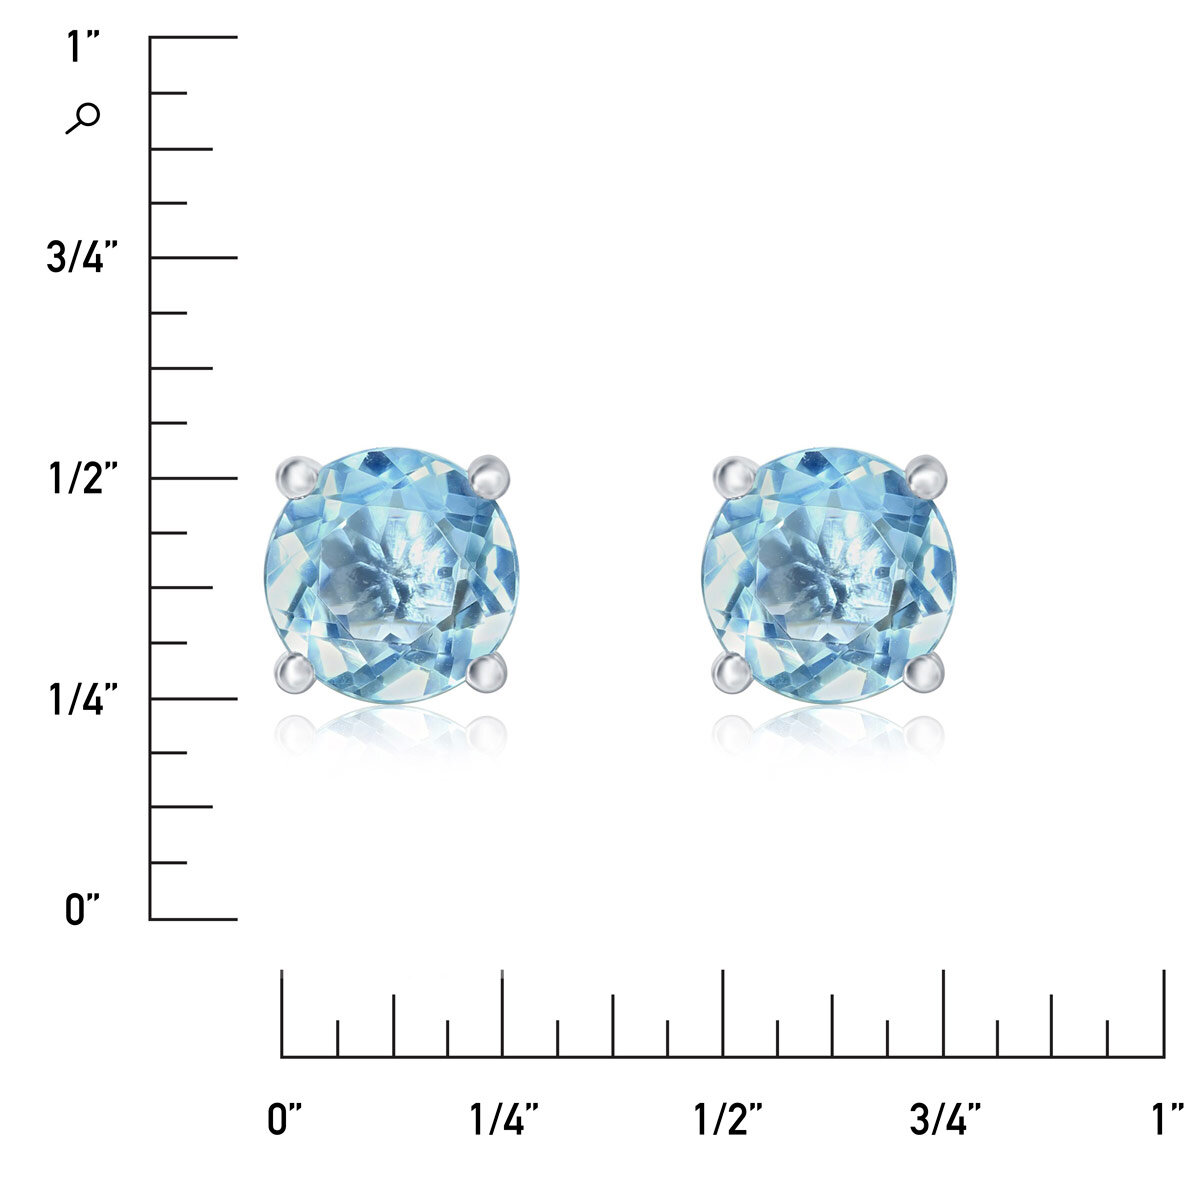 Round Cut Topaz Stud Earrings, 14ct White Gold